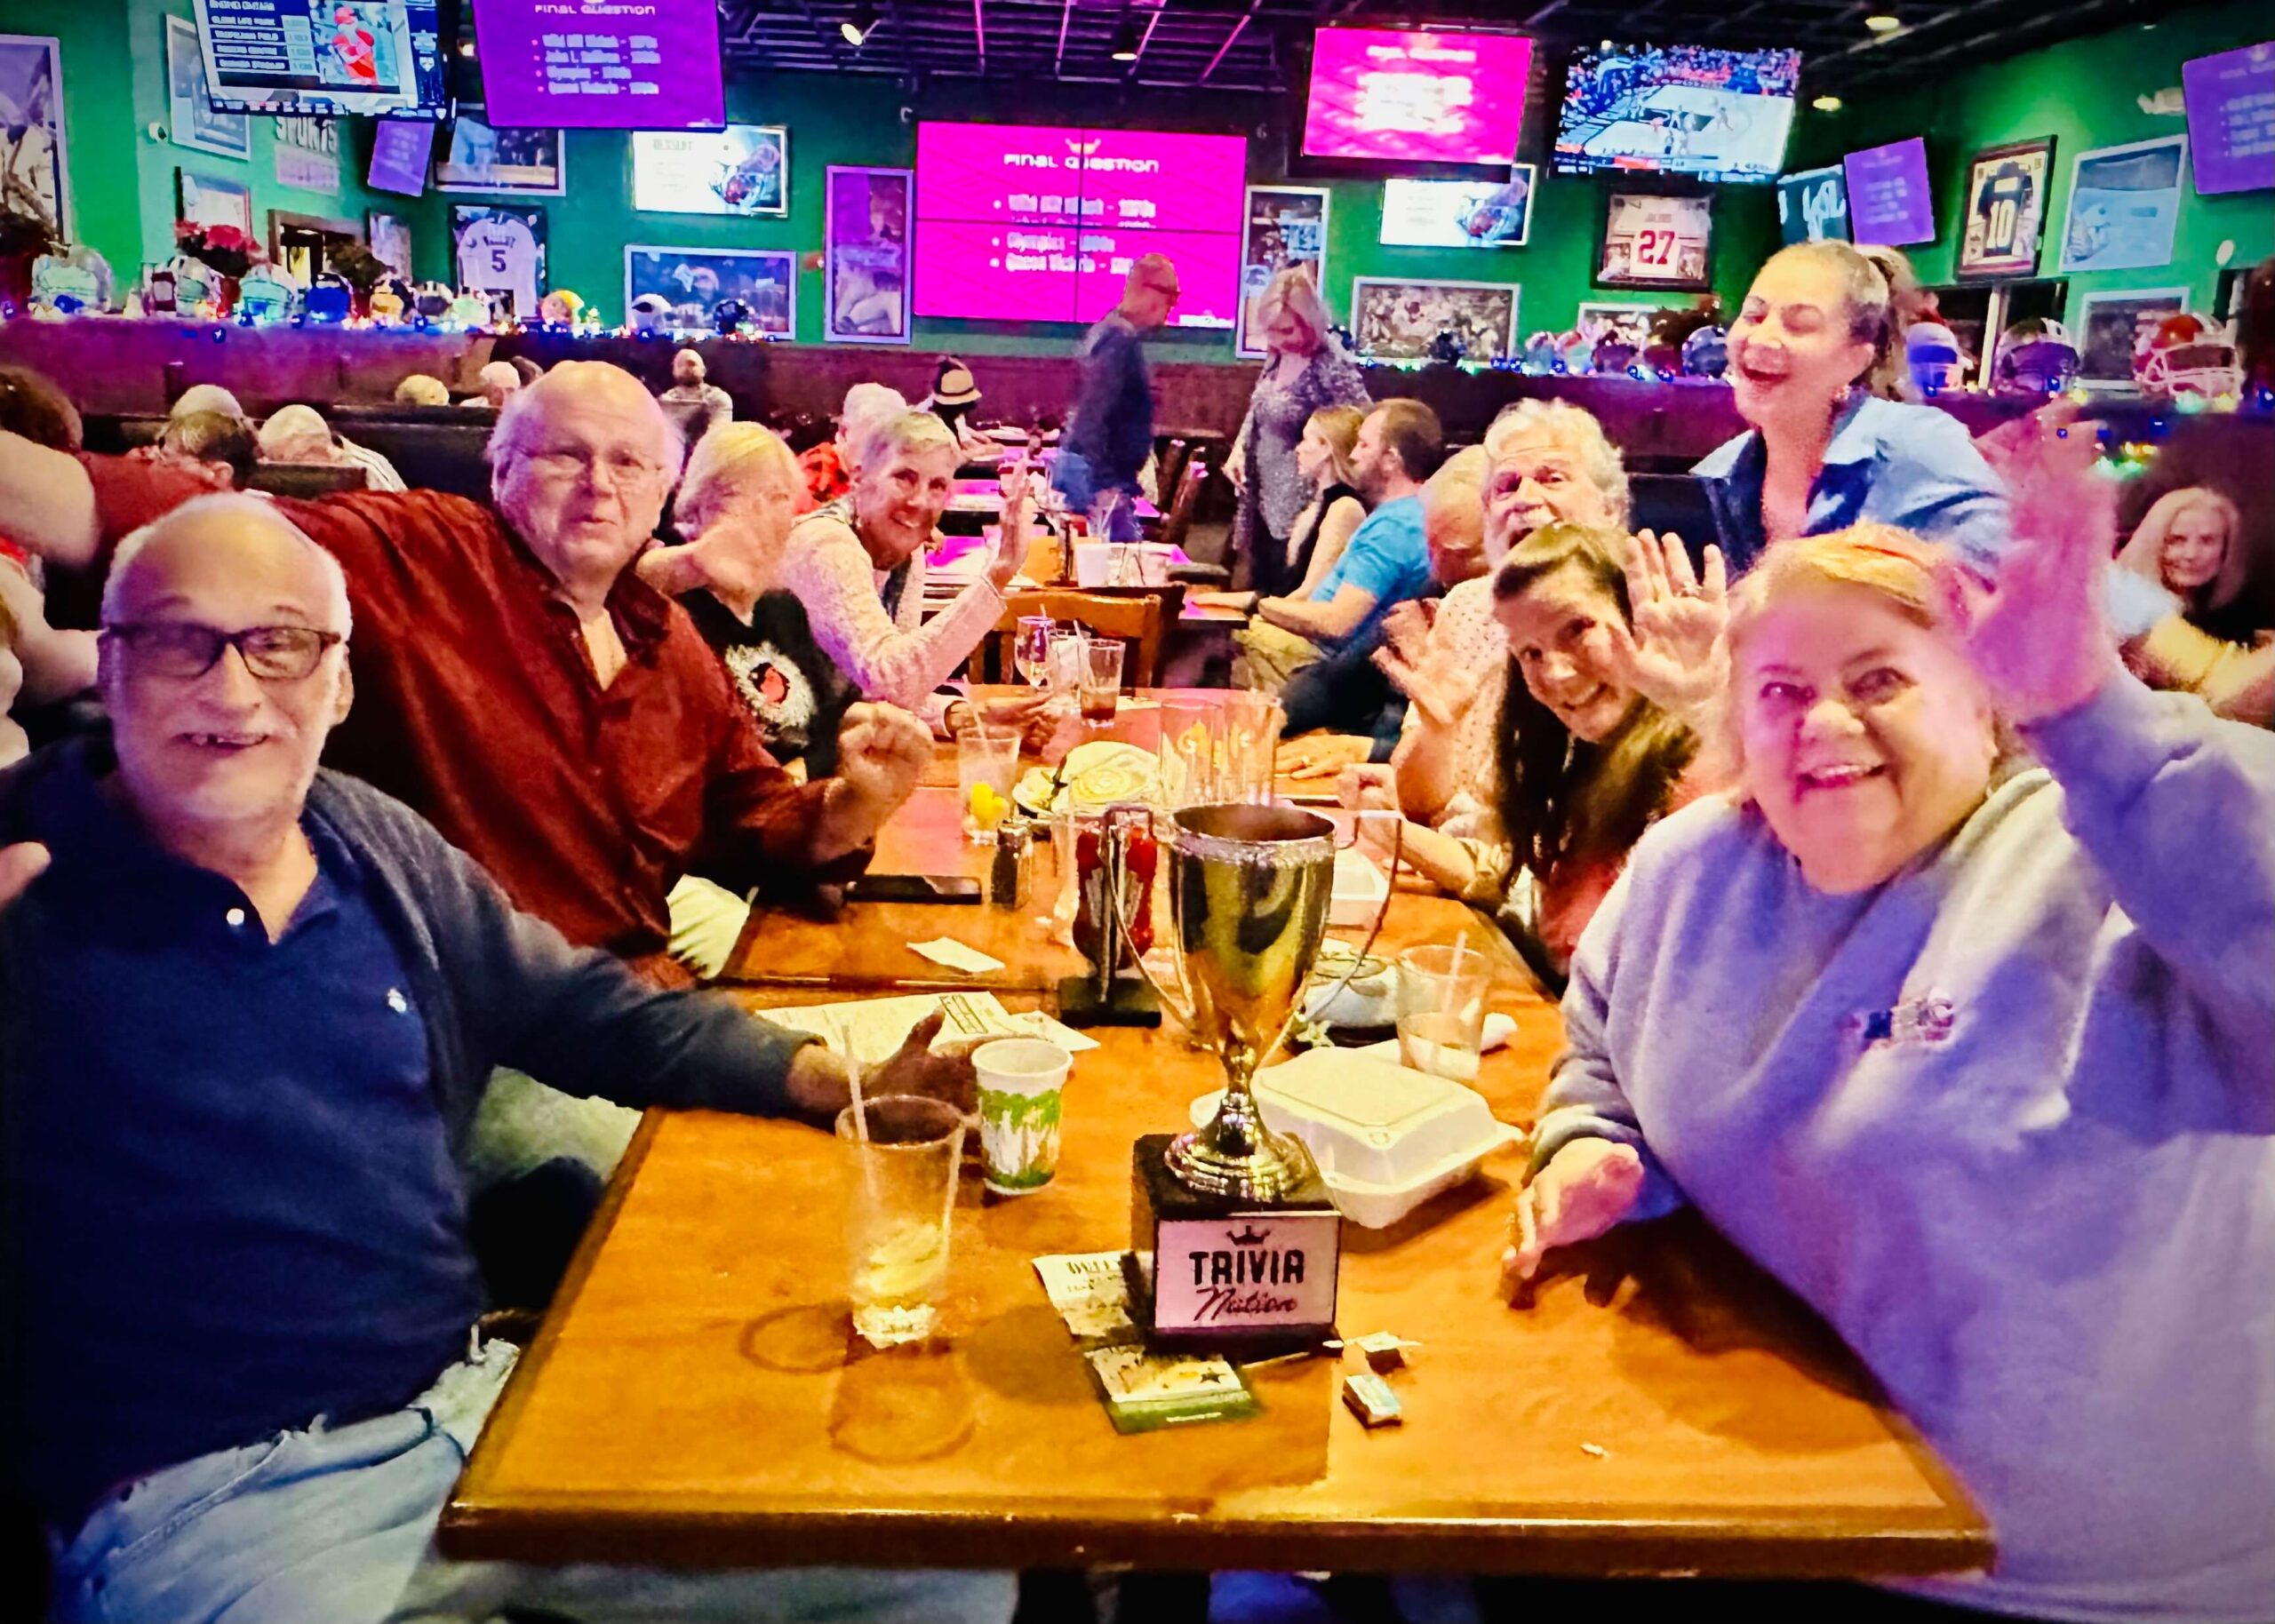 Duffy's Sports Grill Port St. Lucie FL 34986 trivia night: group of adults gathered around a table having fun and raising their hands up with a Trivia Nation trophy on the table and tables of other restaurant patrons behind them